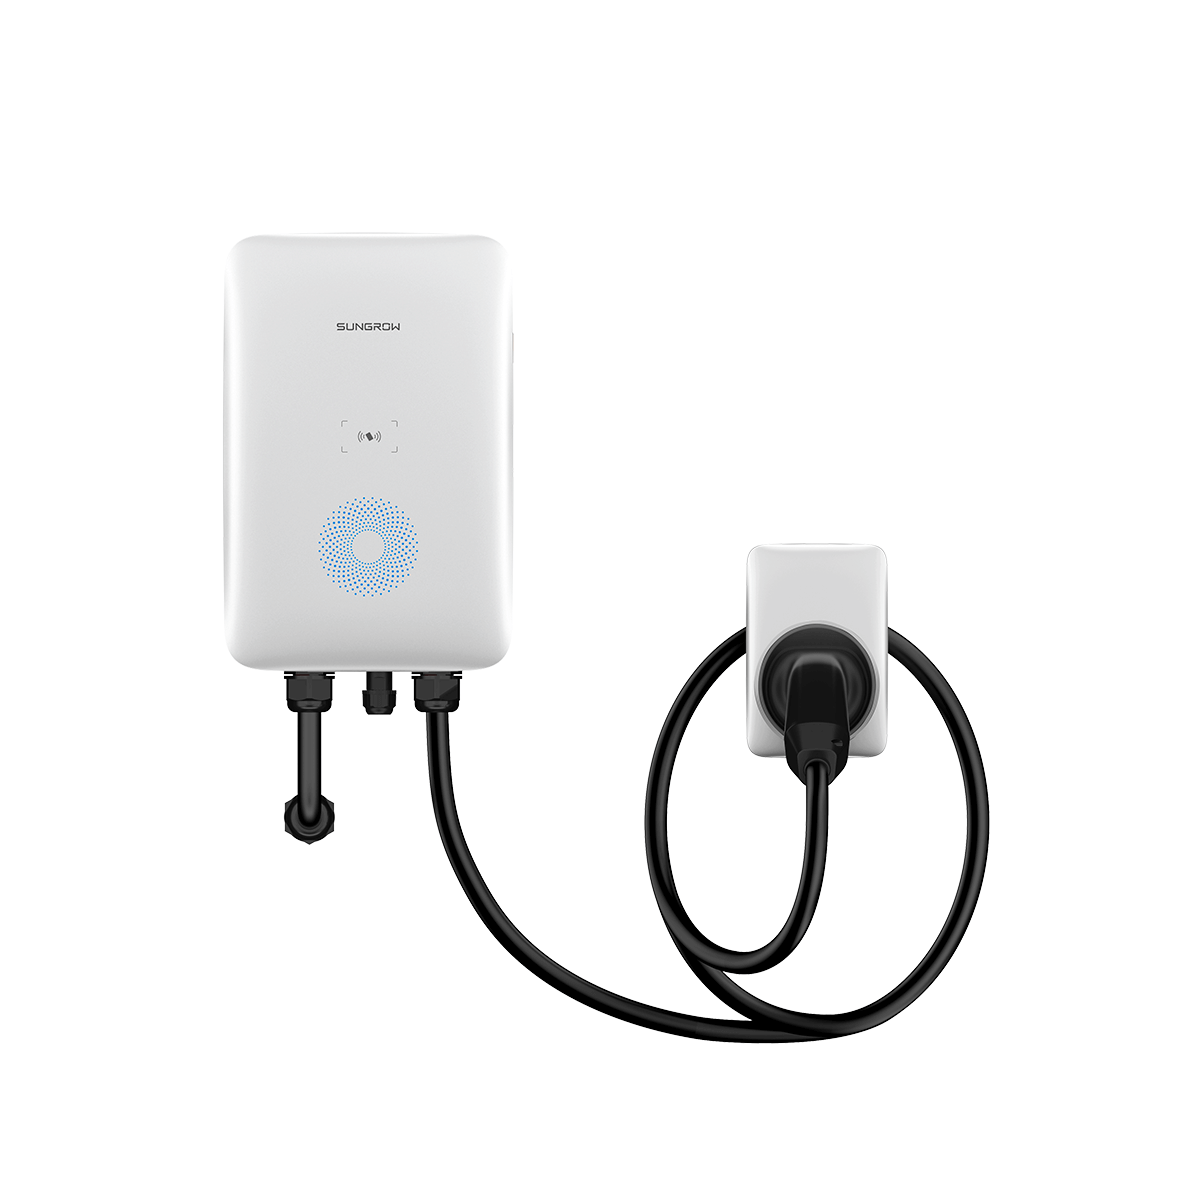 Sungrow 7 kW 1PH stand-alone charger